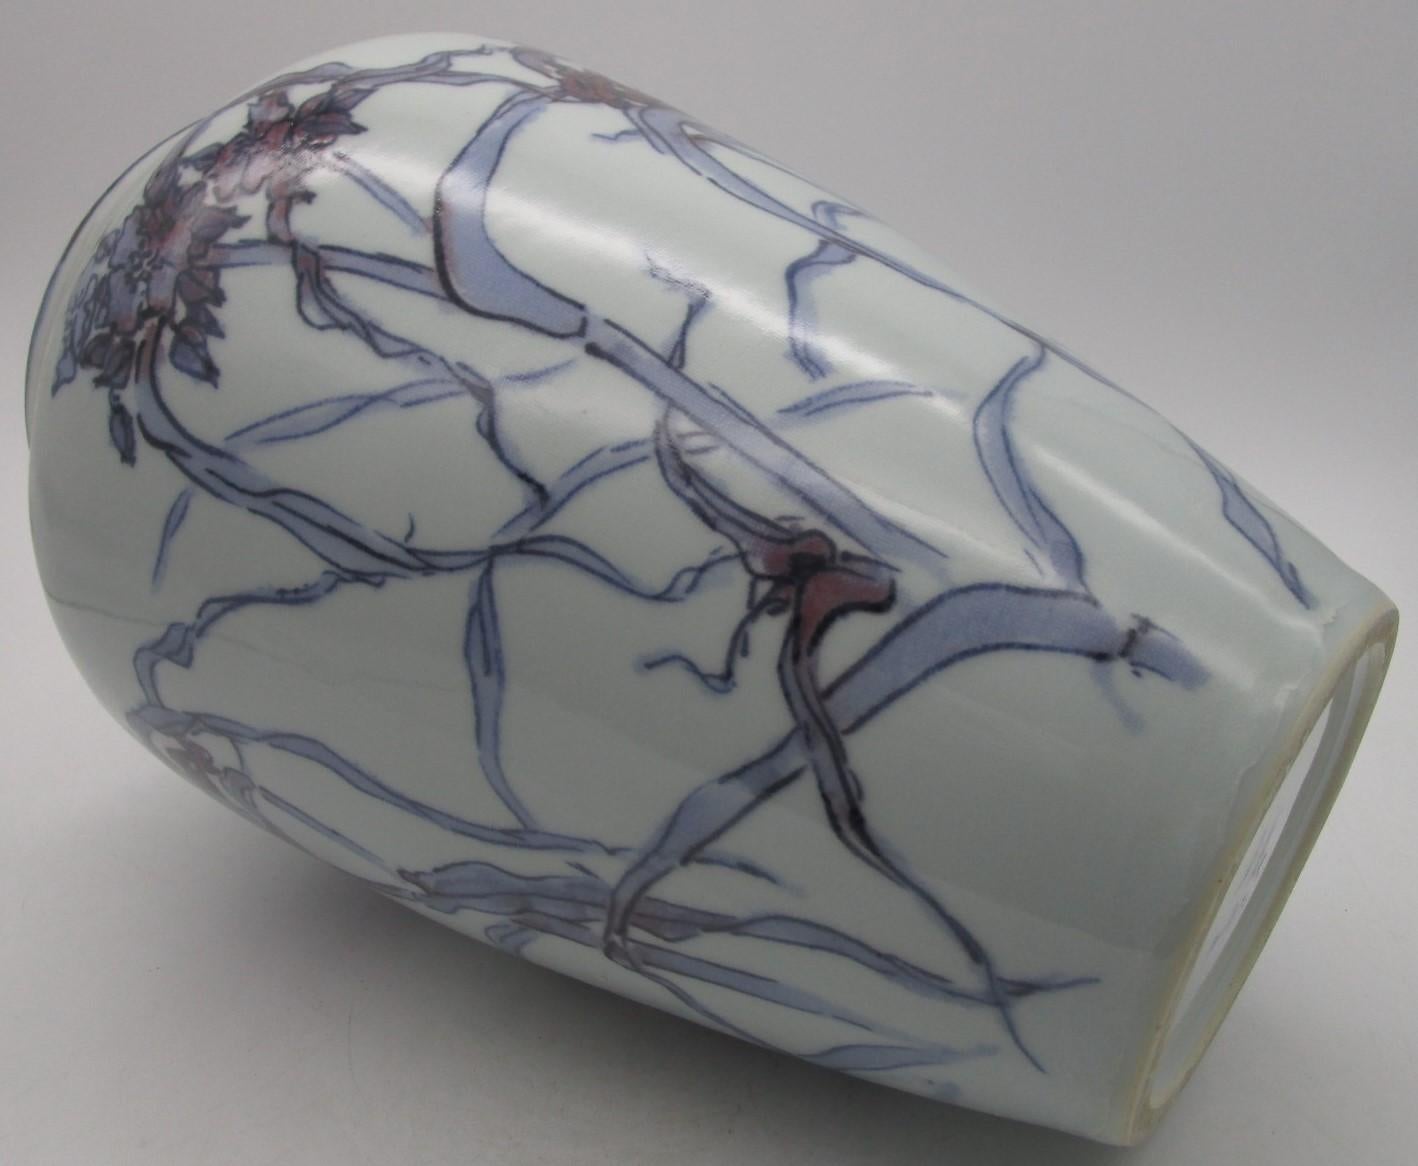 Japanese mid 20th century signed decorative porcelain vase (circa 1935,) from Showa period (1926 to 1985). It depicts an attractive safflower motif, an elegant scene hand-painted in purple and underglaze blue on a pure white background, on a